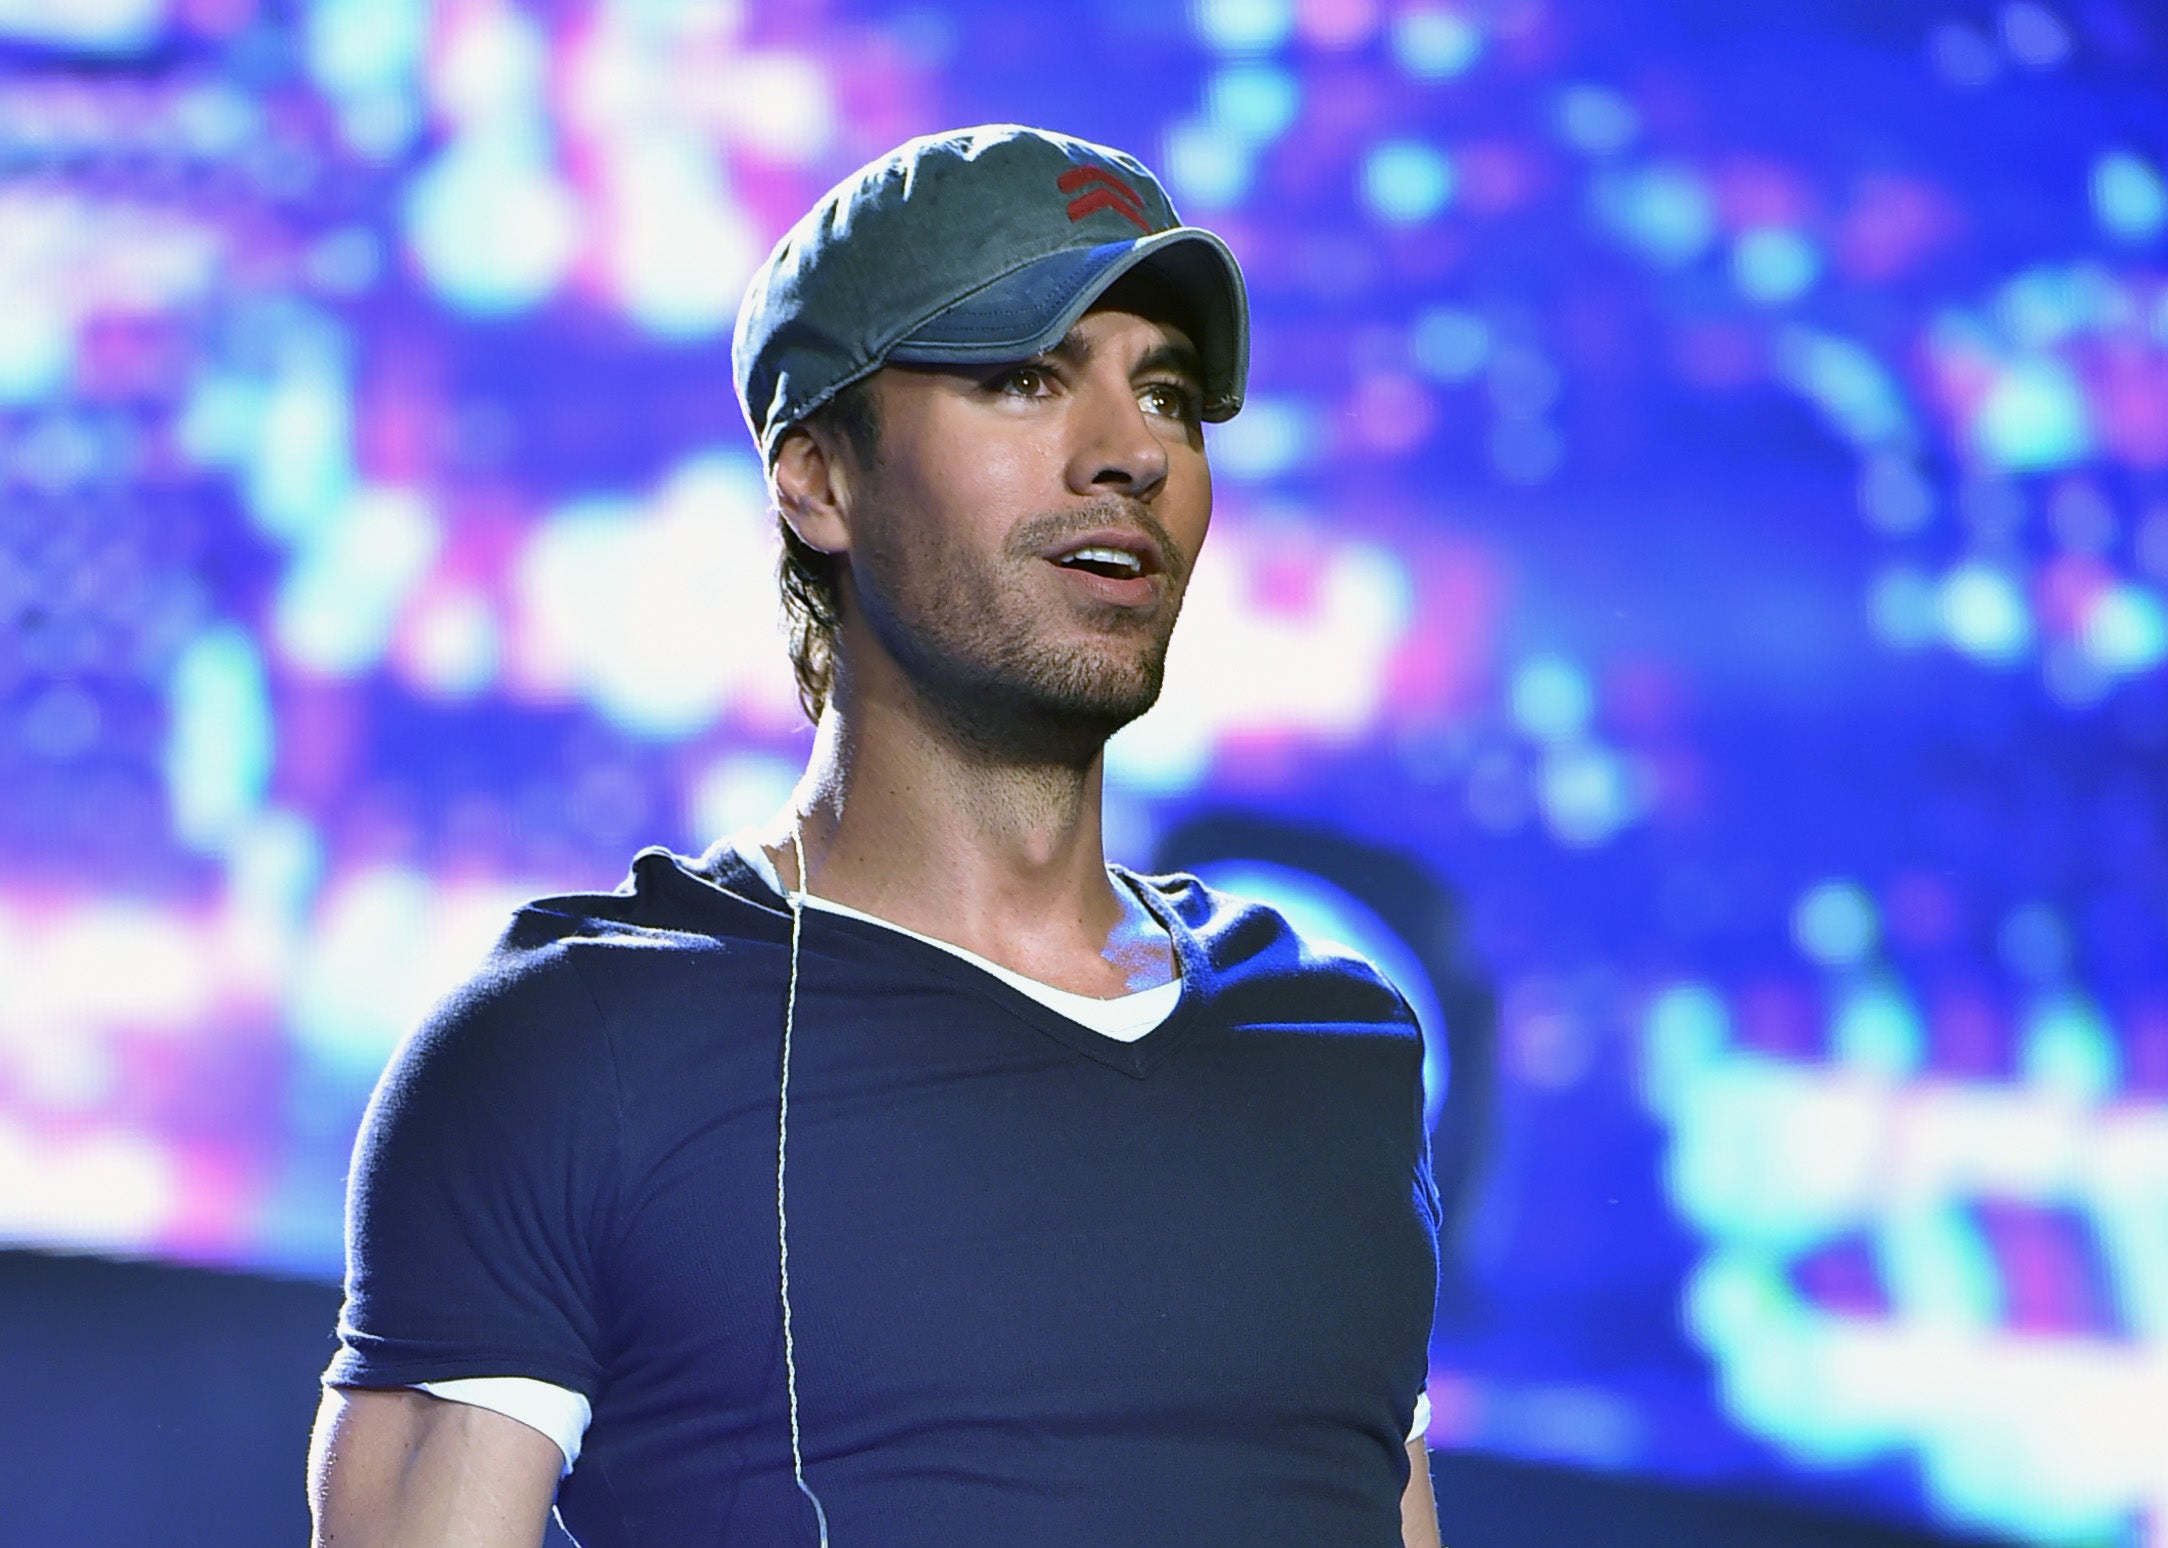 Enrique Iglesias performing in New Jersey